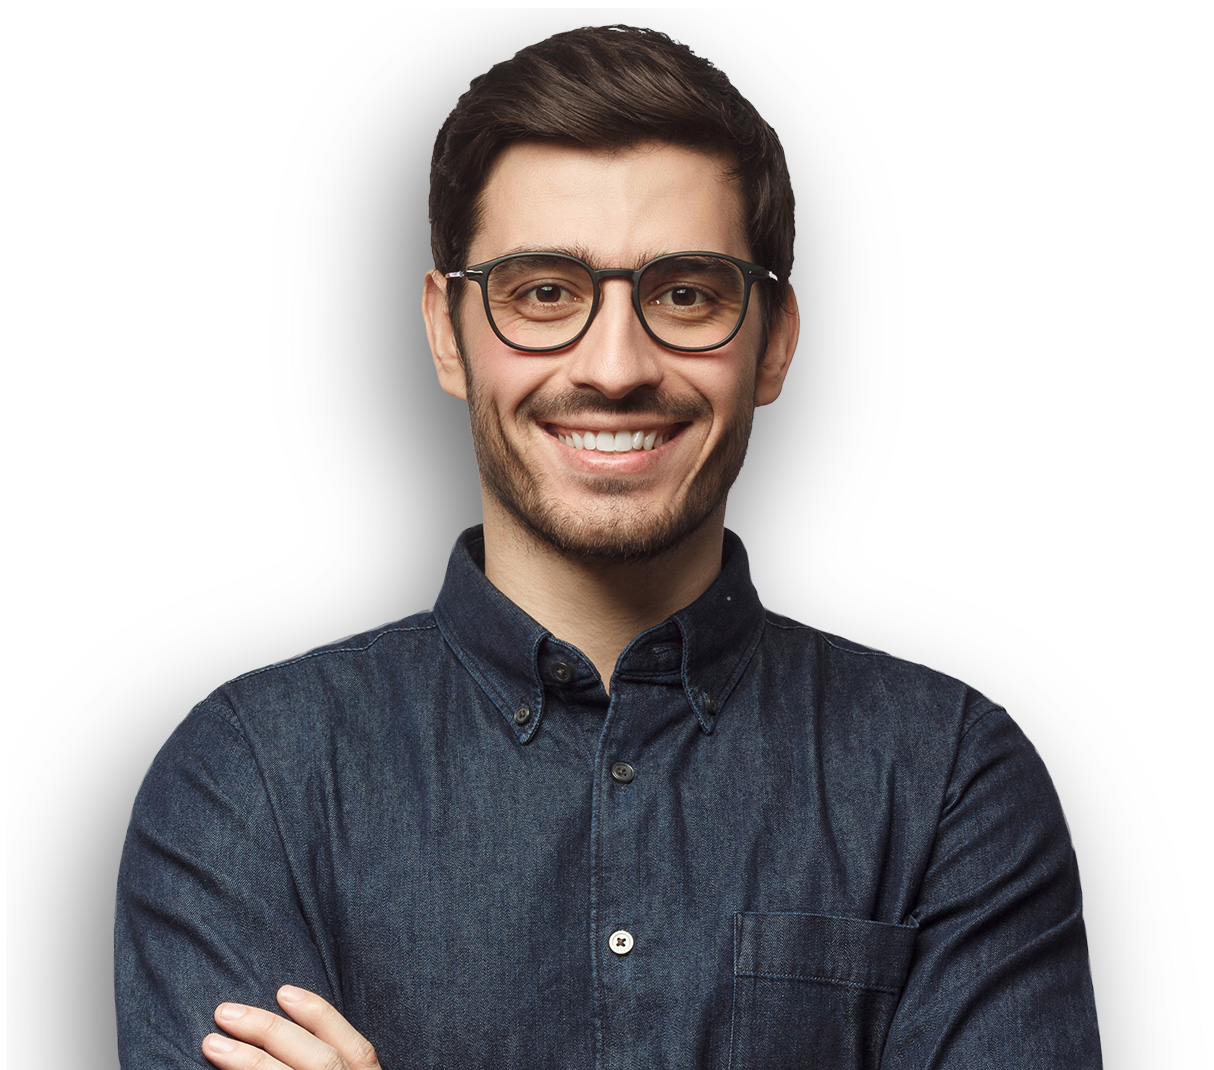 Handsome man with glasses smiling with arms folded